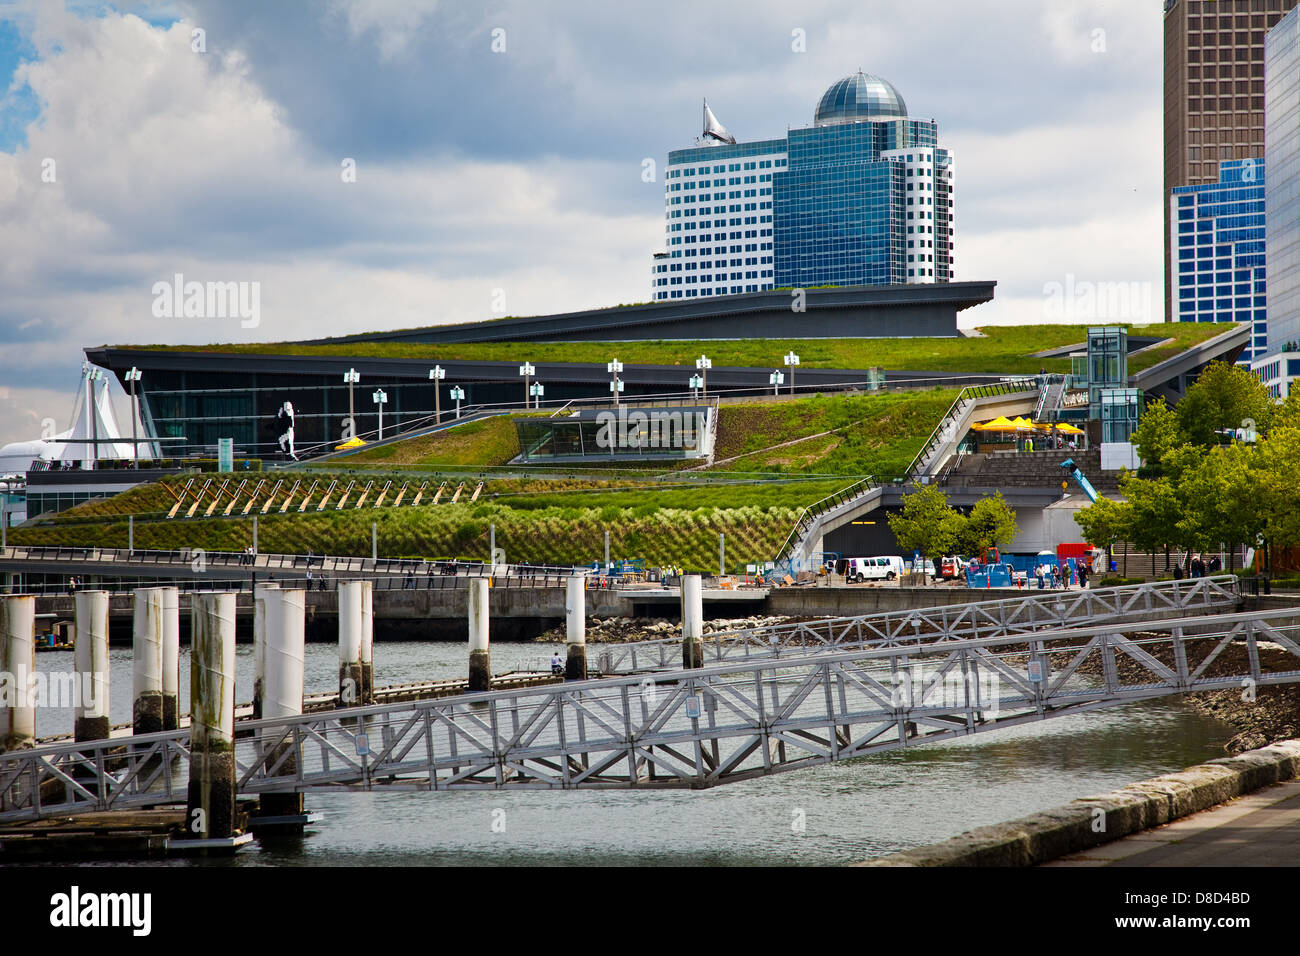 Vancouver Convention Centre with its wild grass roof, Canada Stock Photo